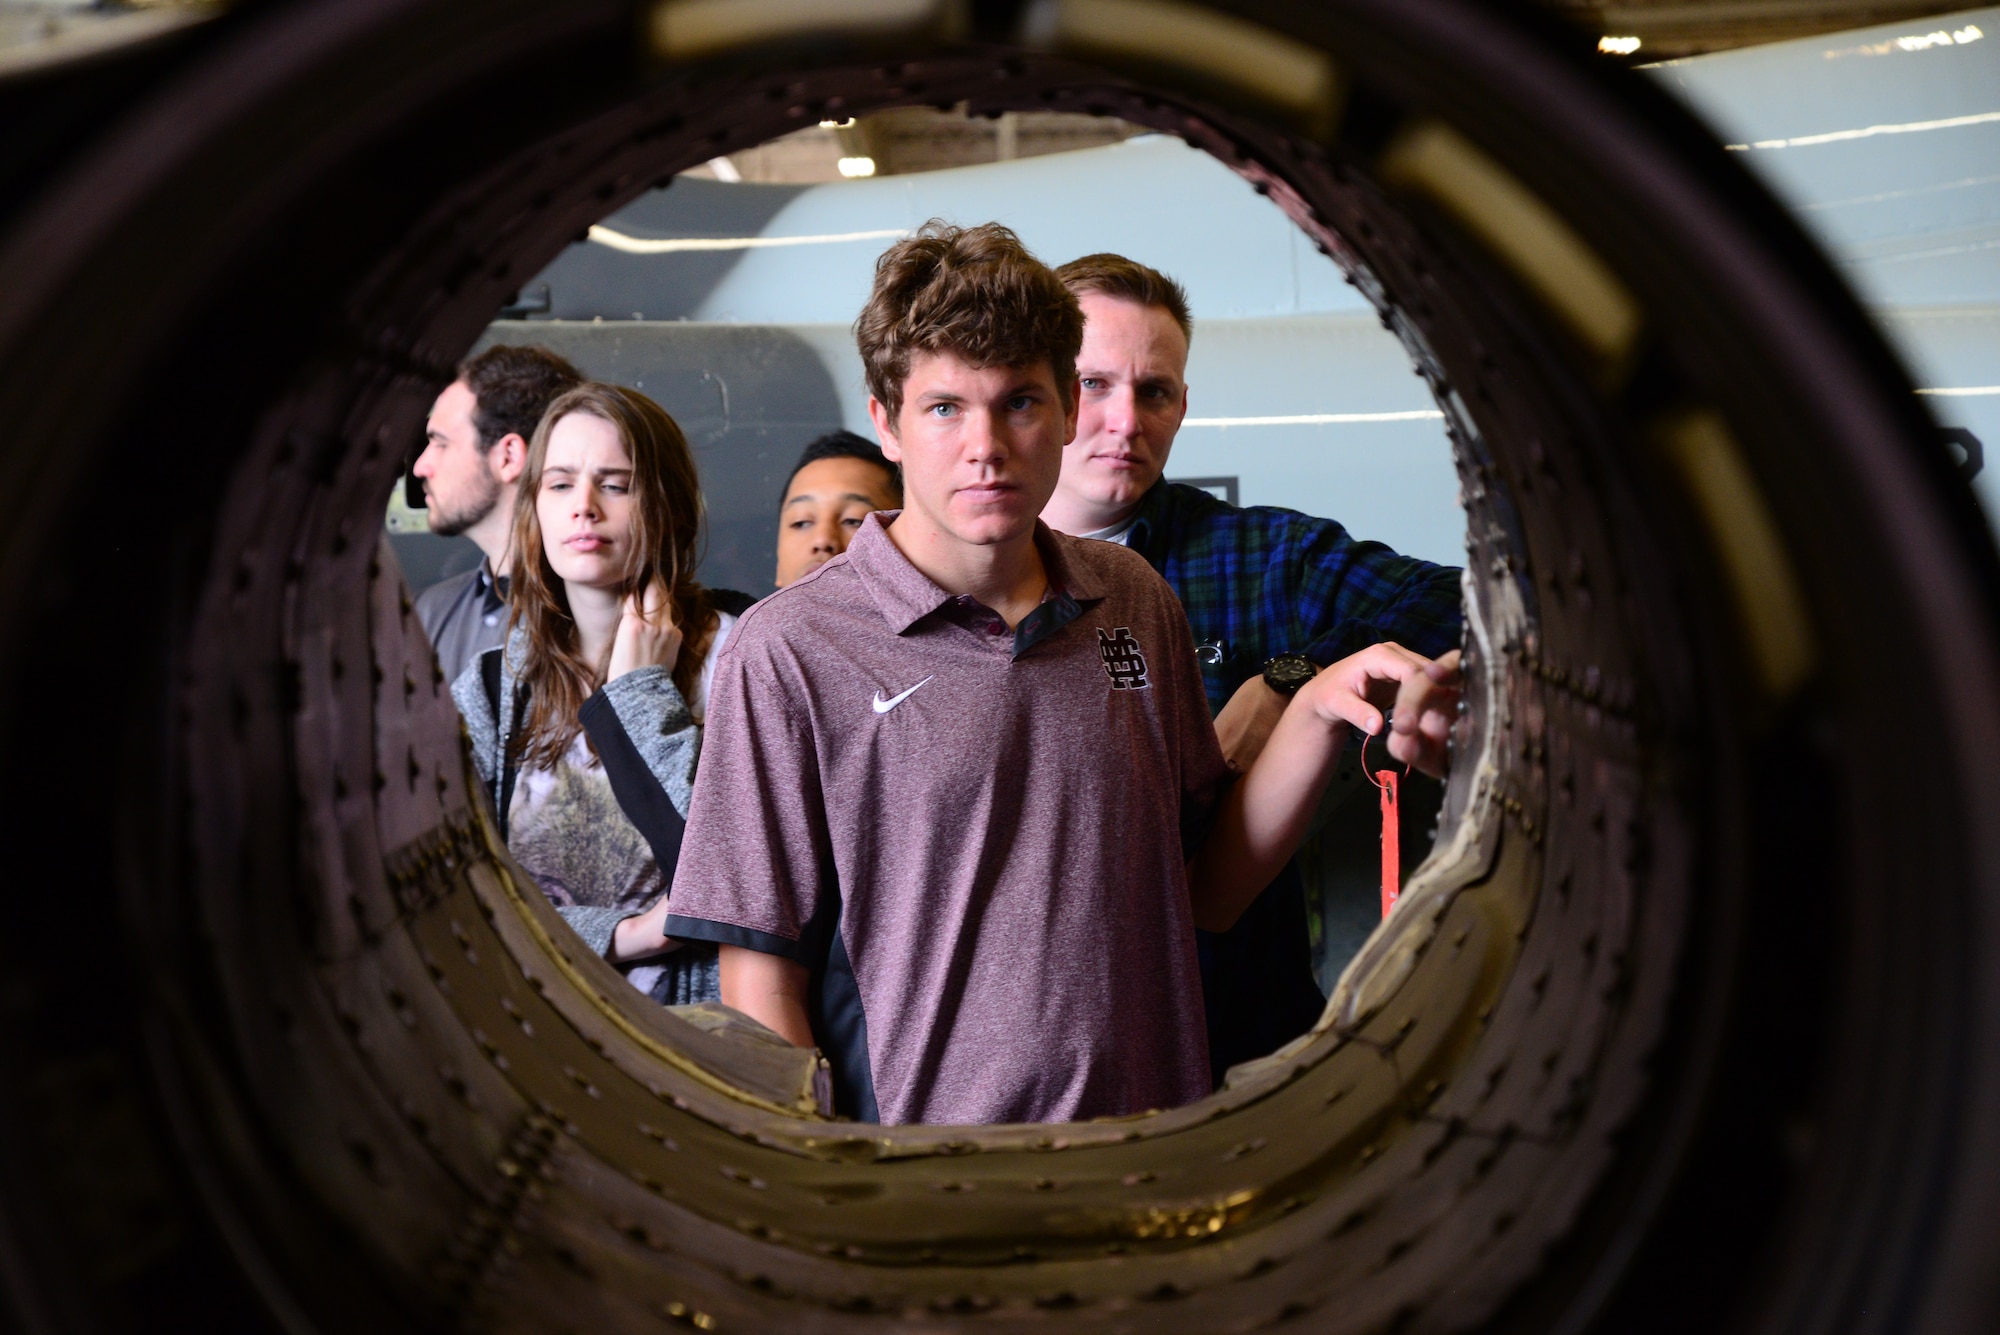 David Mongeau, a Mississippi State University Aircraft Propulsion student, examines the shell of a T-38C Talon engine April 4, 2018, on Columbus Air Force Base, Mississippi. An aerospace engineering student will spend over 1,000 hours in their classroom learning the different components of aircraft. (U.S. Air Force photo by Airman 1st Class Beaux Hebert)